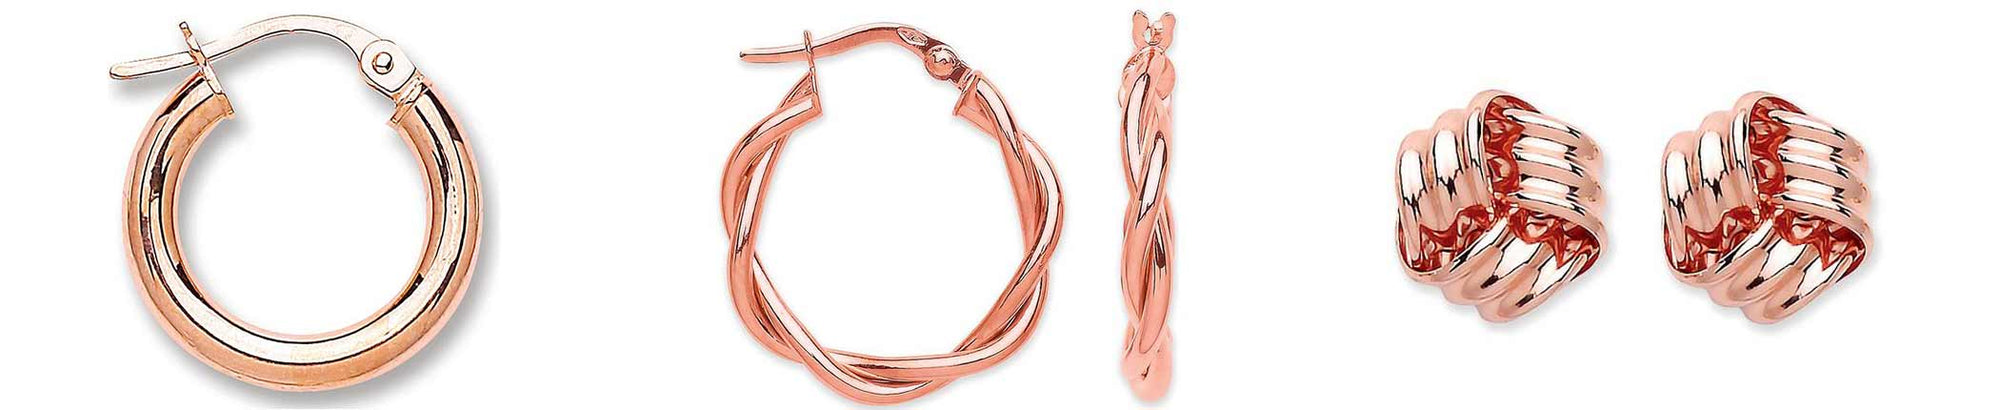 <font color=#000000>10 of the best 9ct Rose Gold Earrings and 10 Occasions to wear them</font>